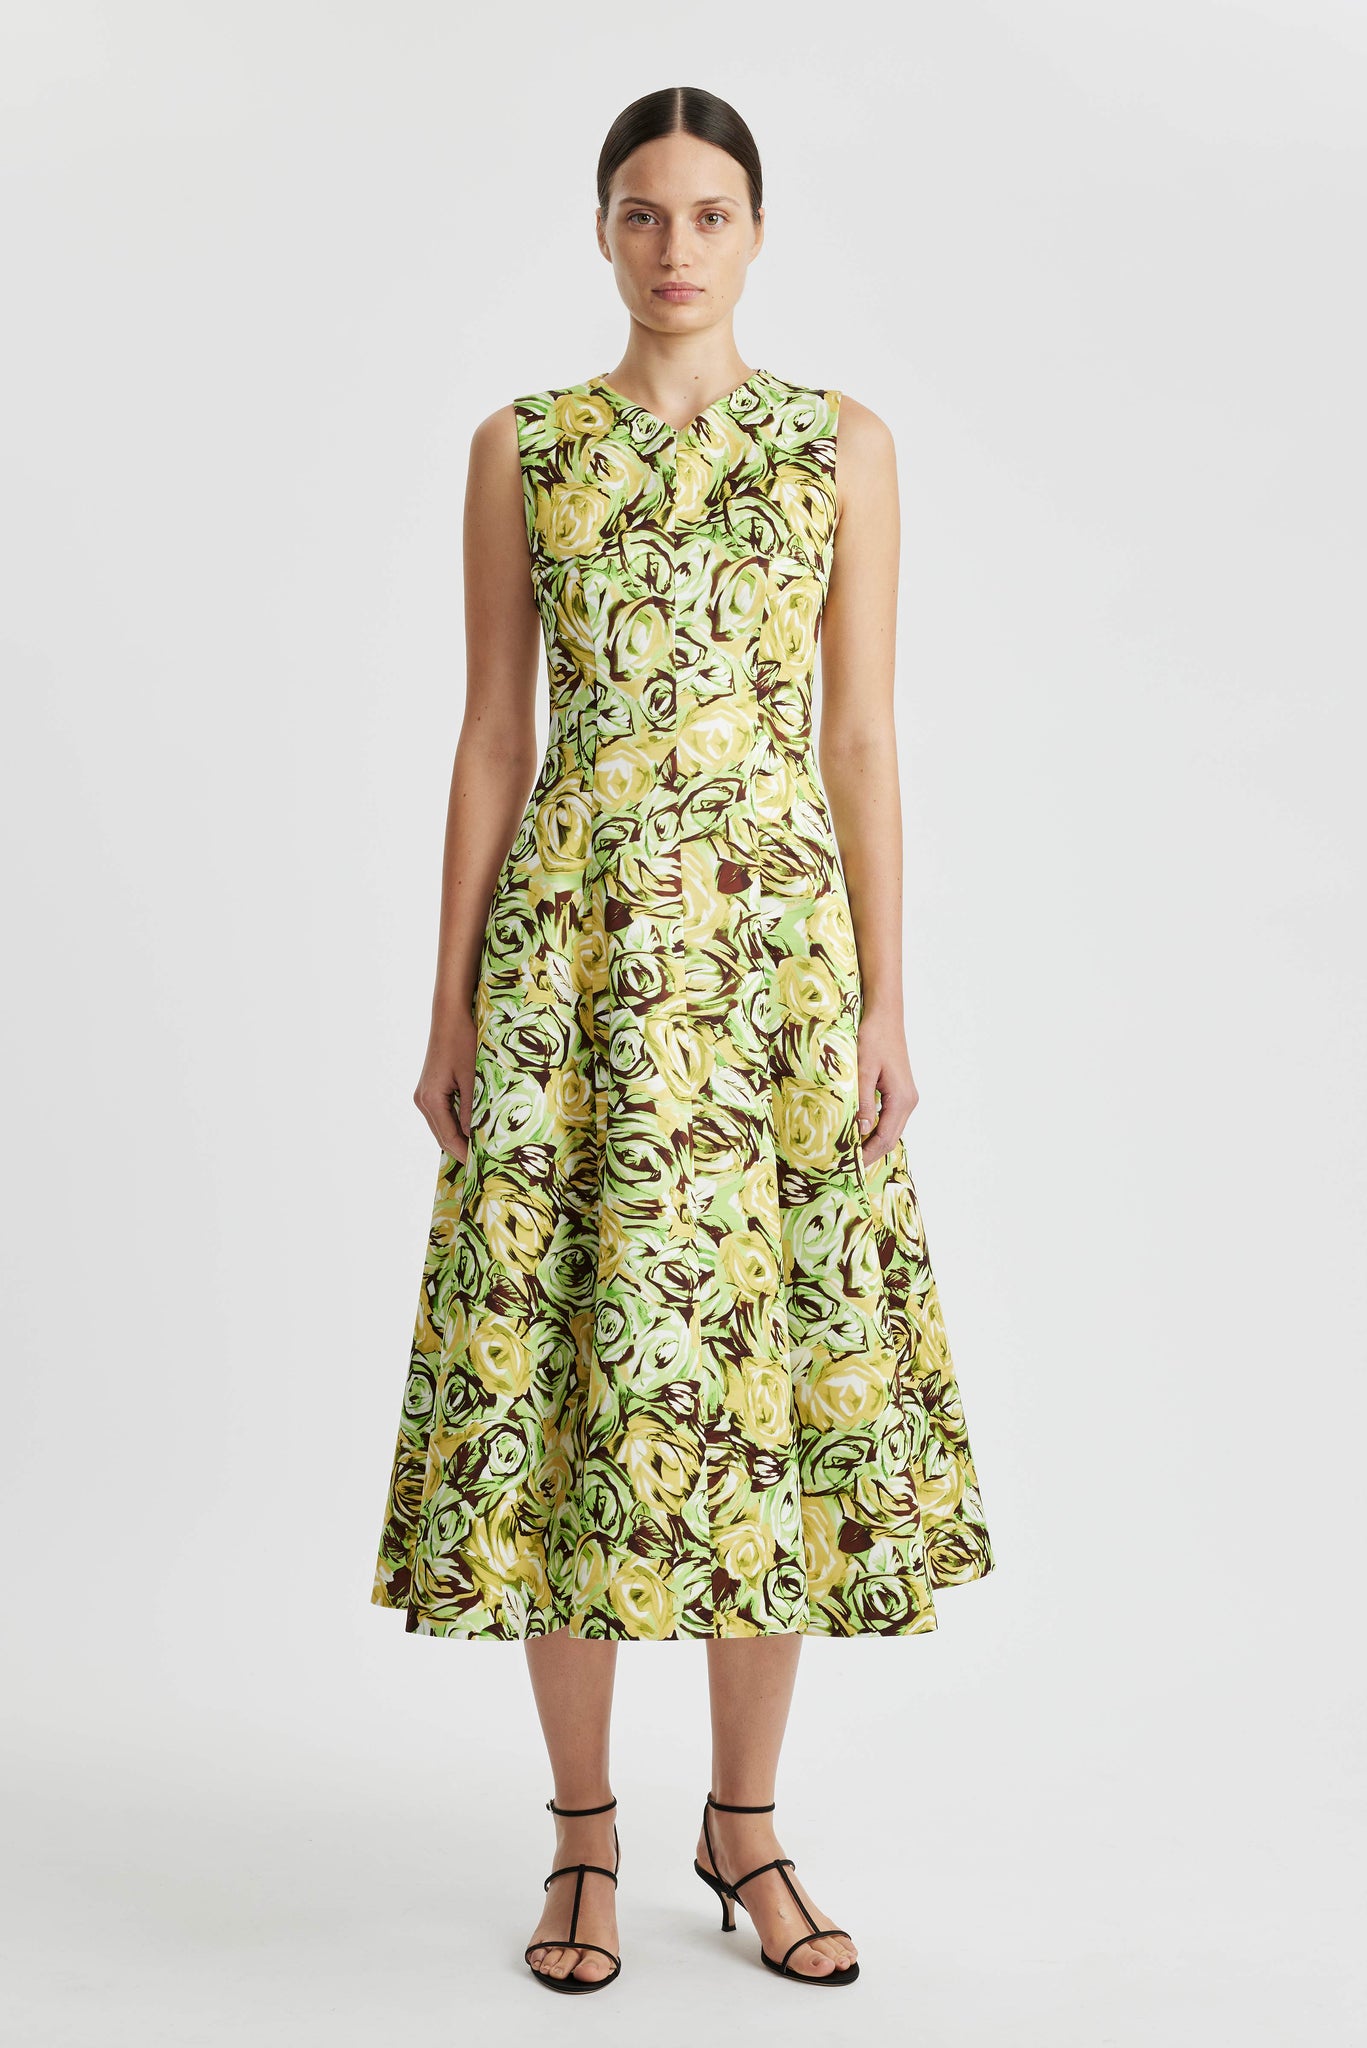 Madi Dress In Abstract Green And Lemon Rose Printed Twill - Emilia Wickstead